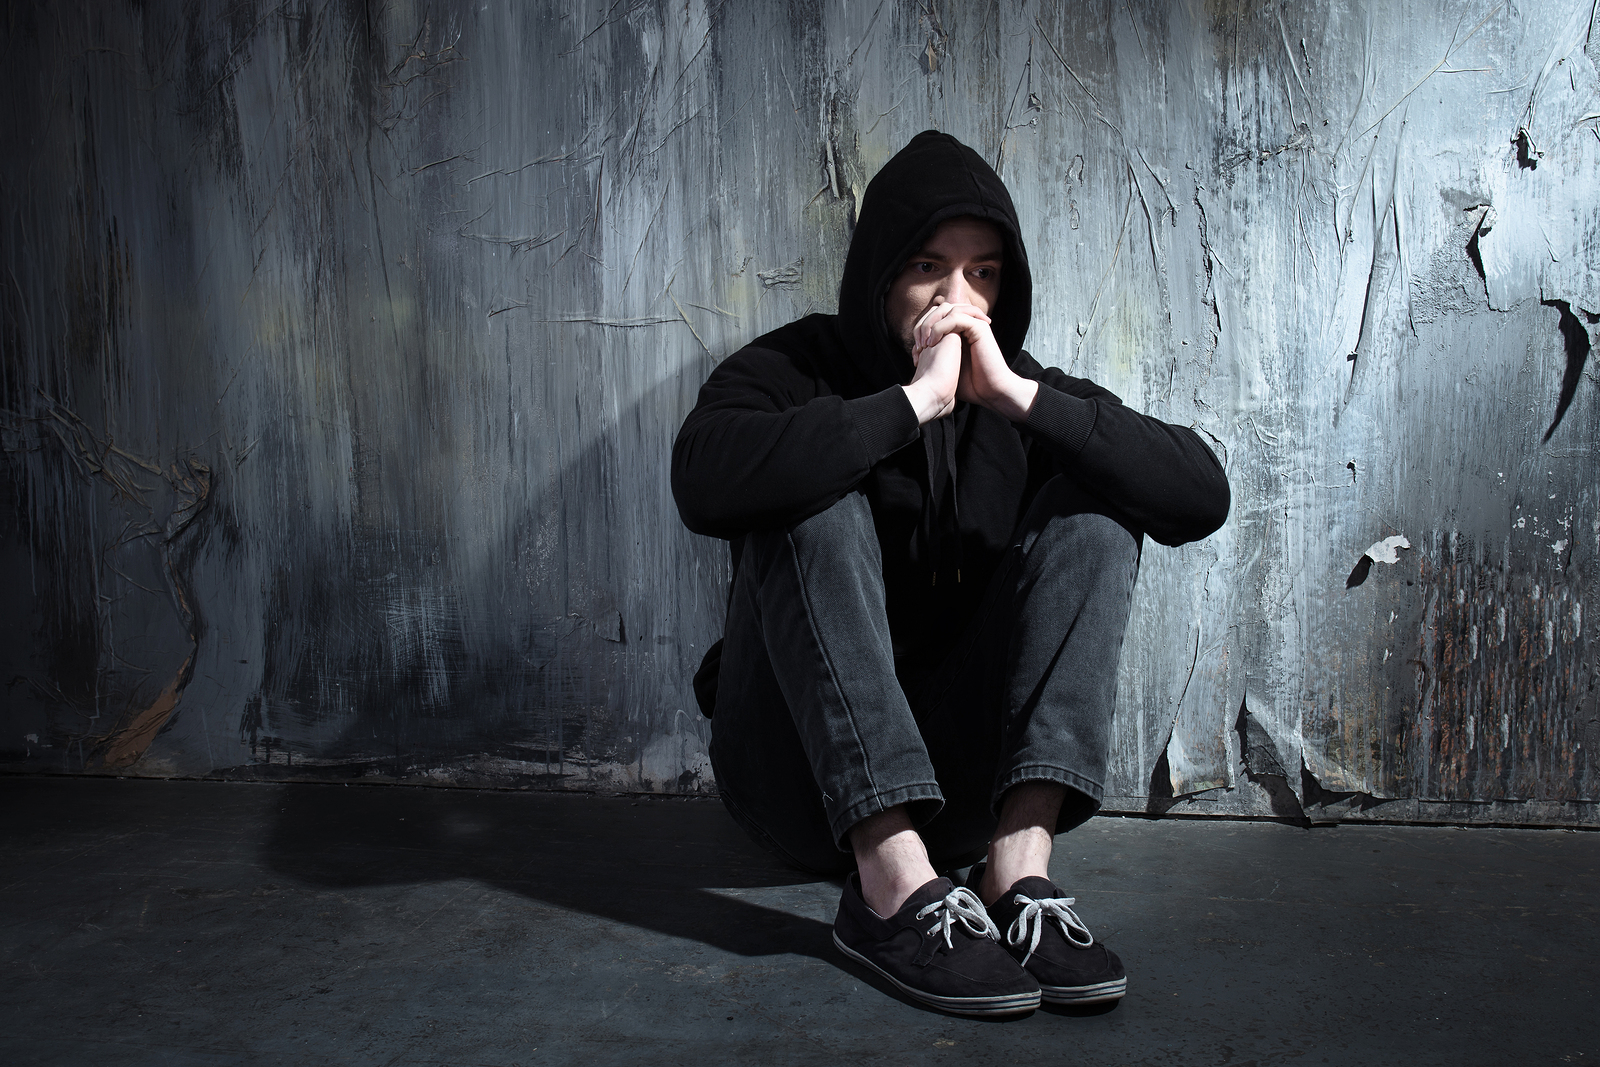 Photo of desperate young drug addict wearing hood and sitting alone in dark 1600 x 1067